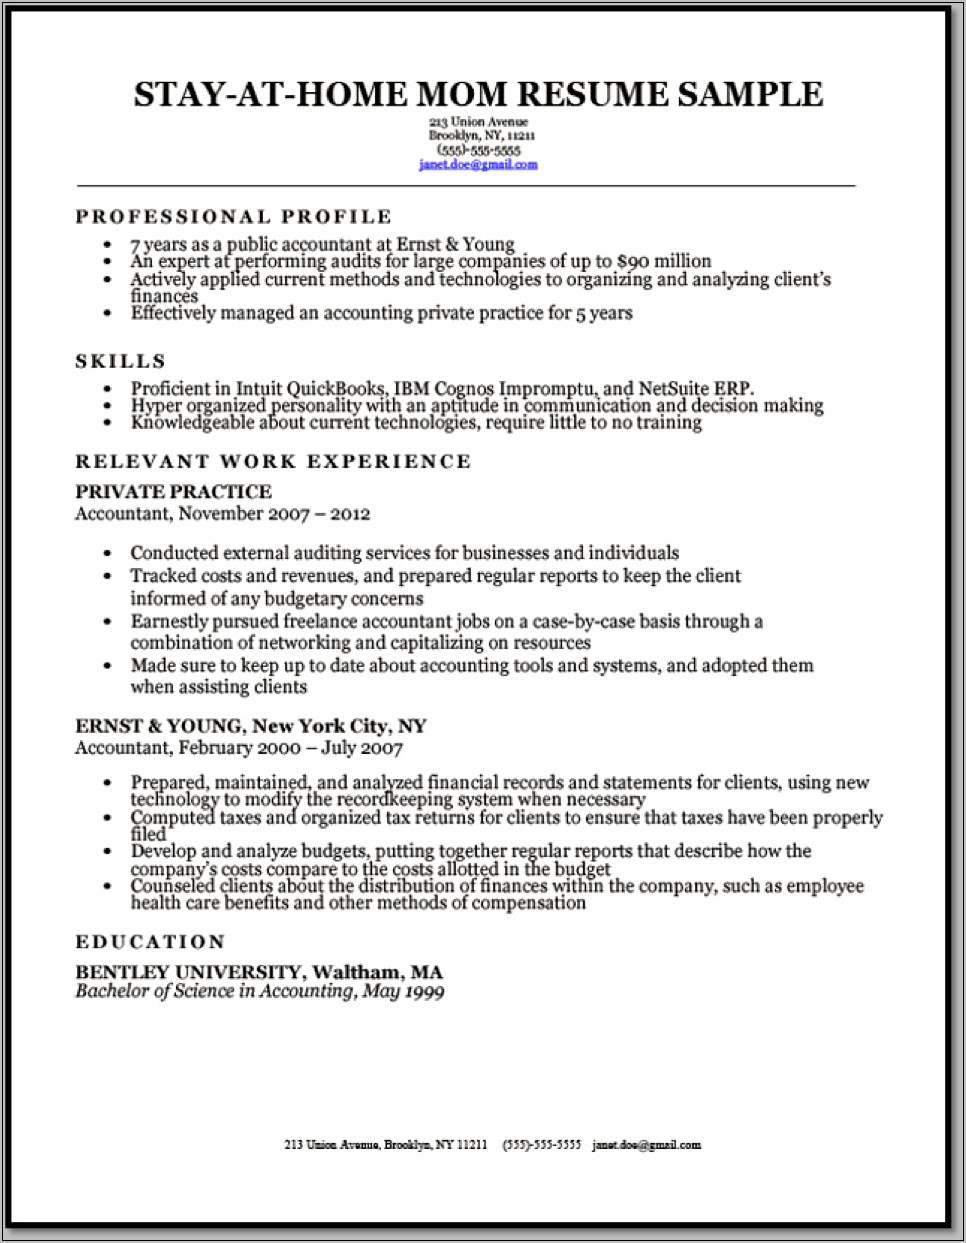 Stay At Homes Getting Back Into Work Resume